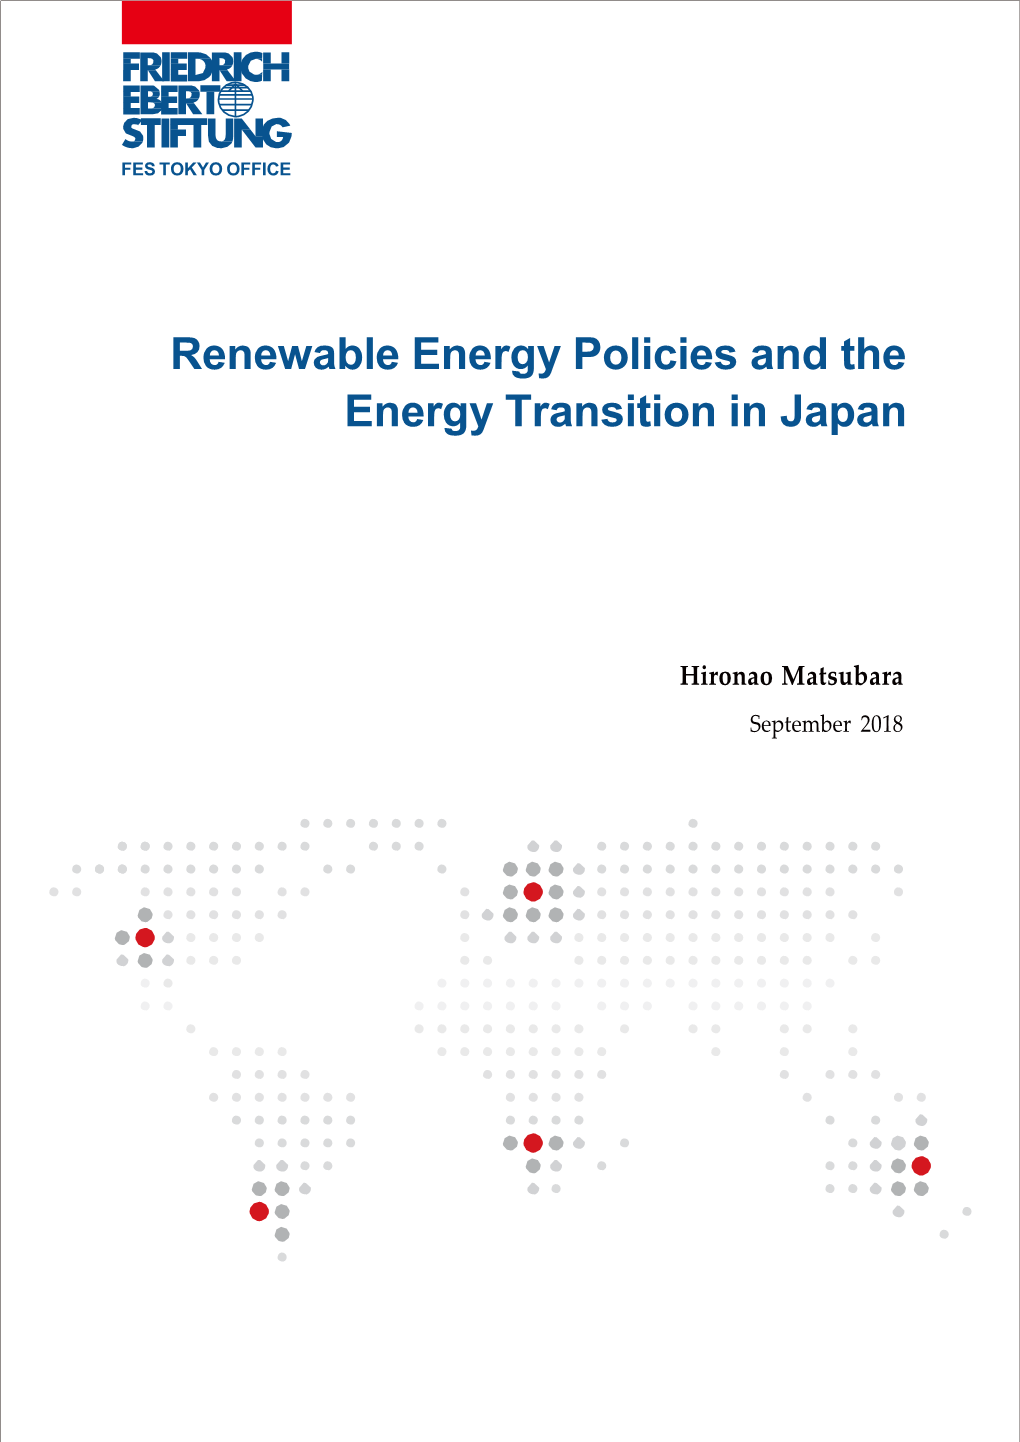 Renewable Energy Policies and the Energy Transition in Japan